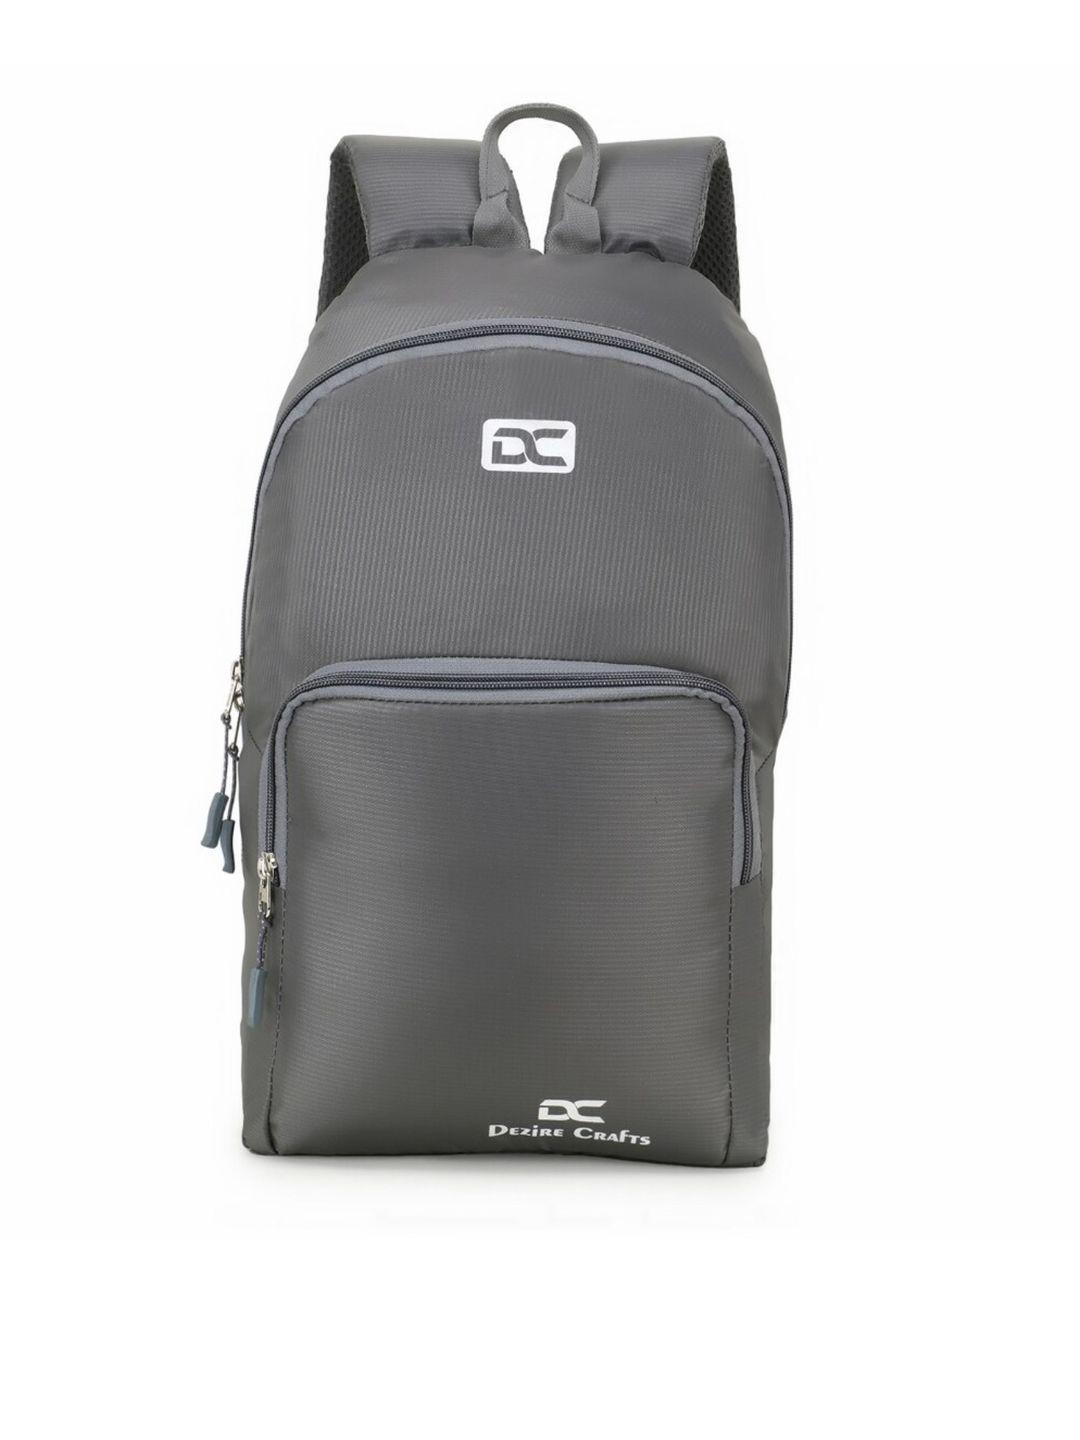 dezire crafts unisex grey solid backpack